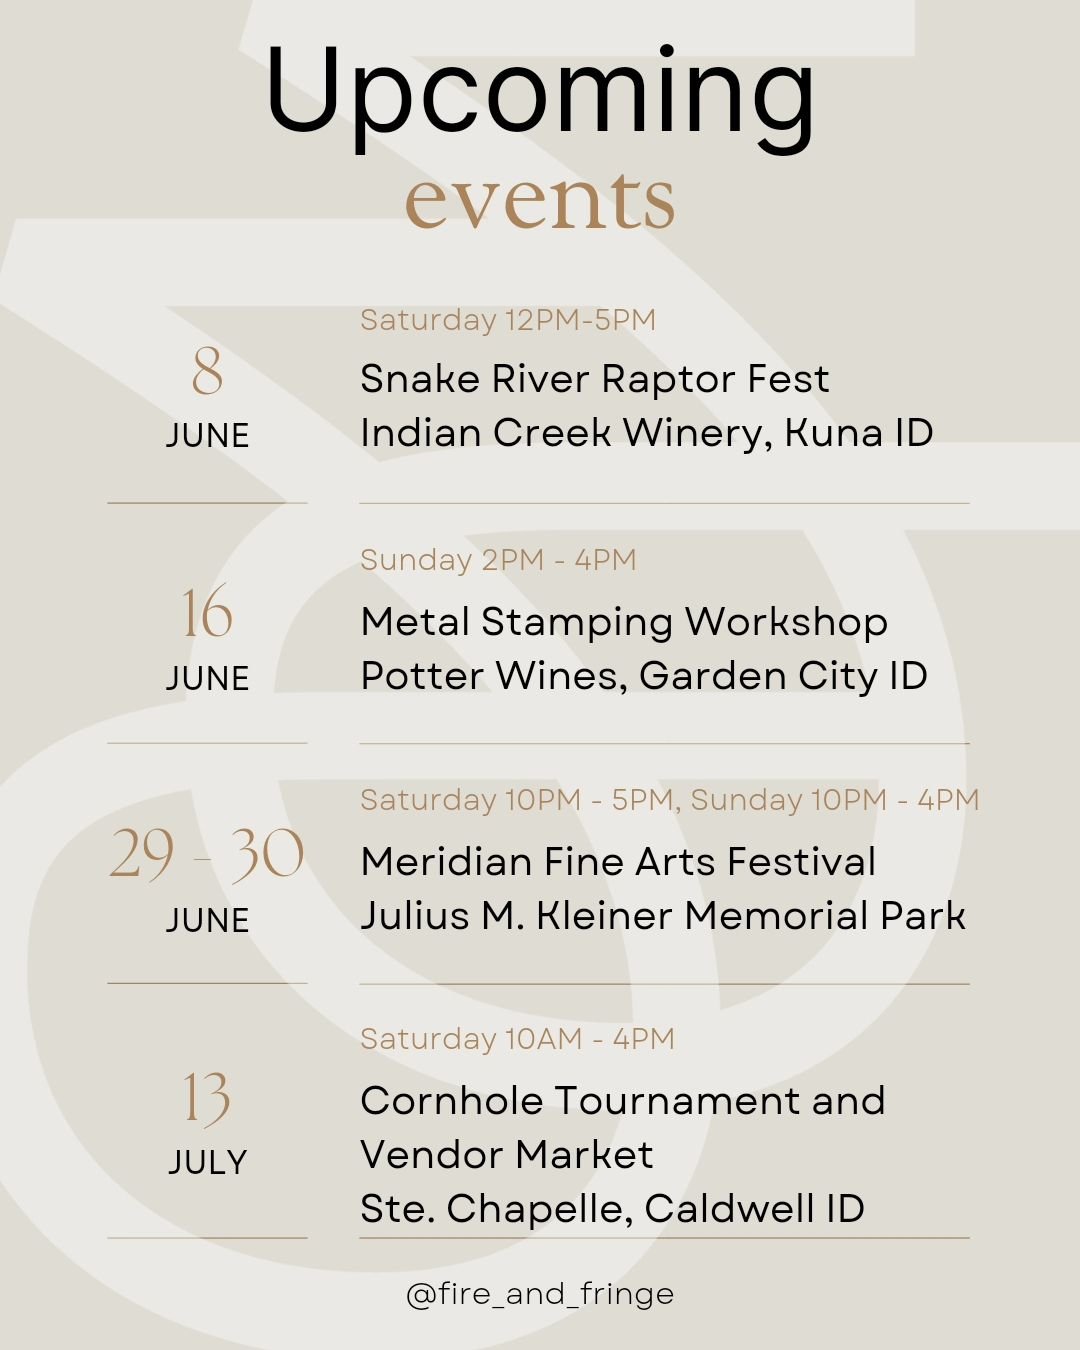 We have so many awesome events in the next few weeks! 

June 8th - Snake River Raptor Fest 12pm to 5pm at @indiancreekwinery. Tickets are FREE. This has been one of my favorite events in the last few years 

June 16th - Metal Stamping Workshop 2pm to